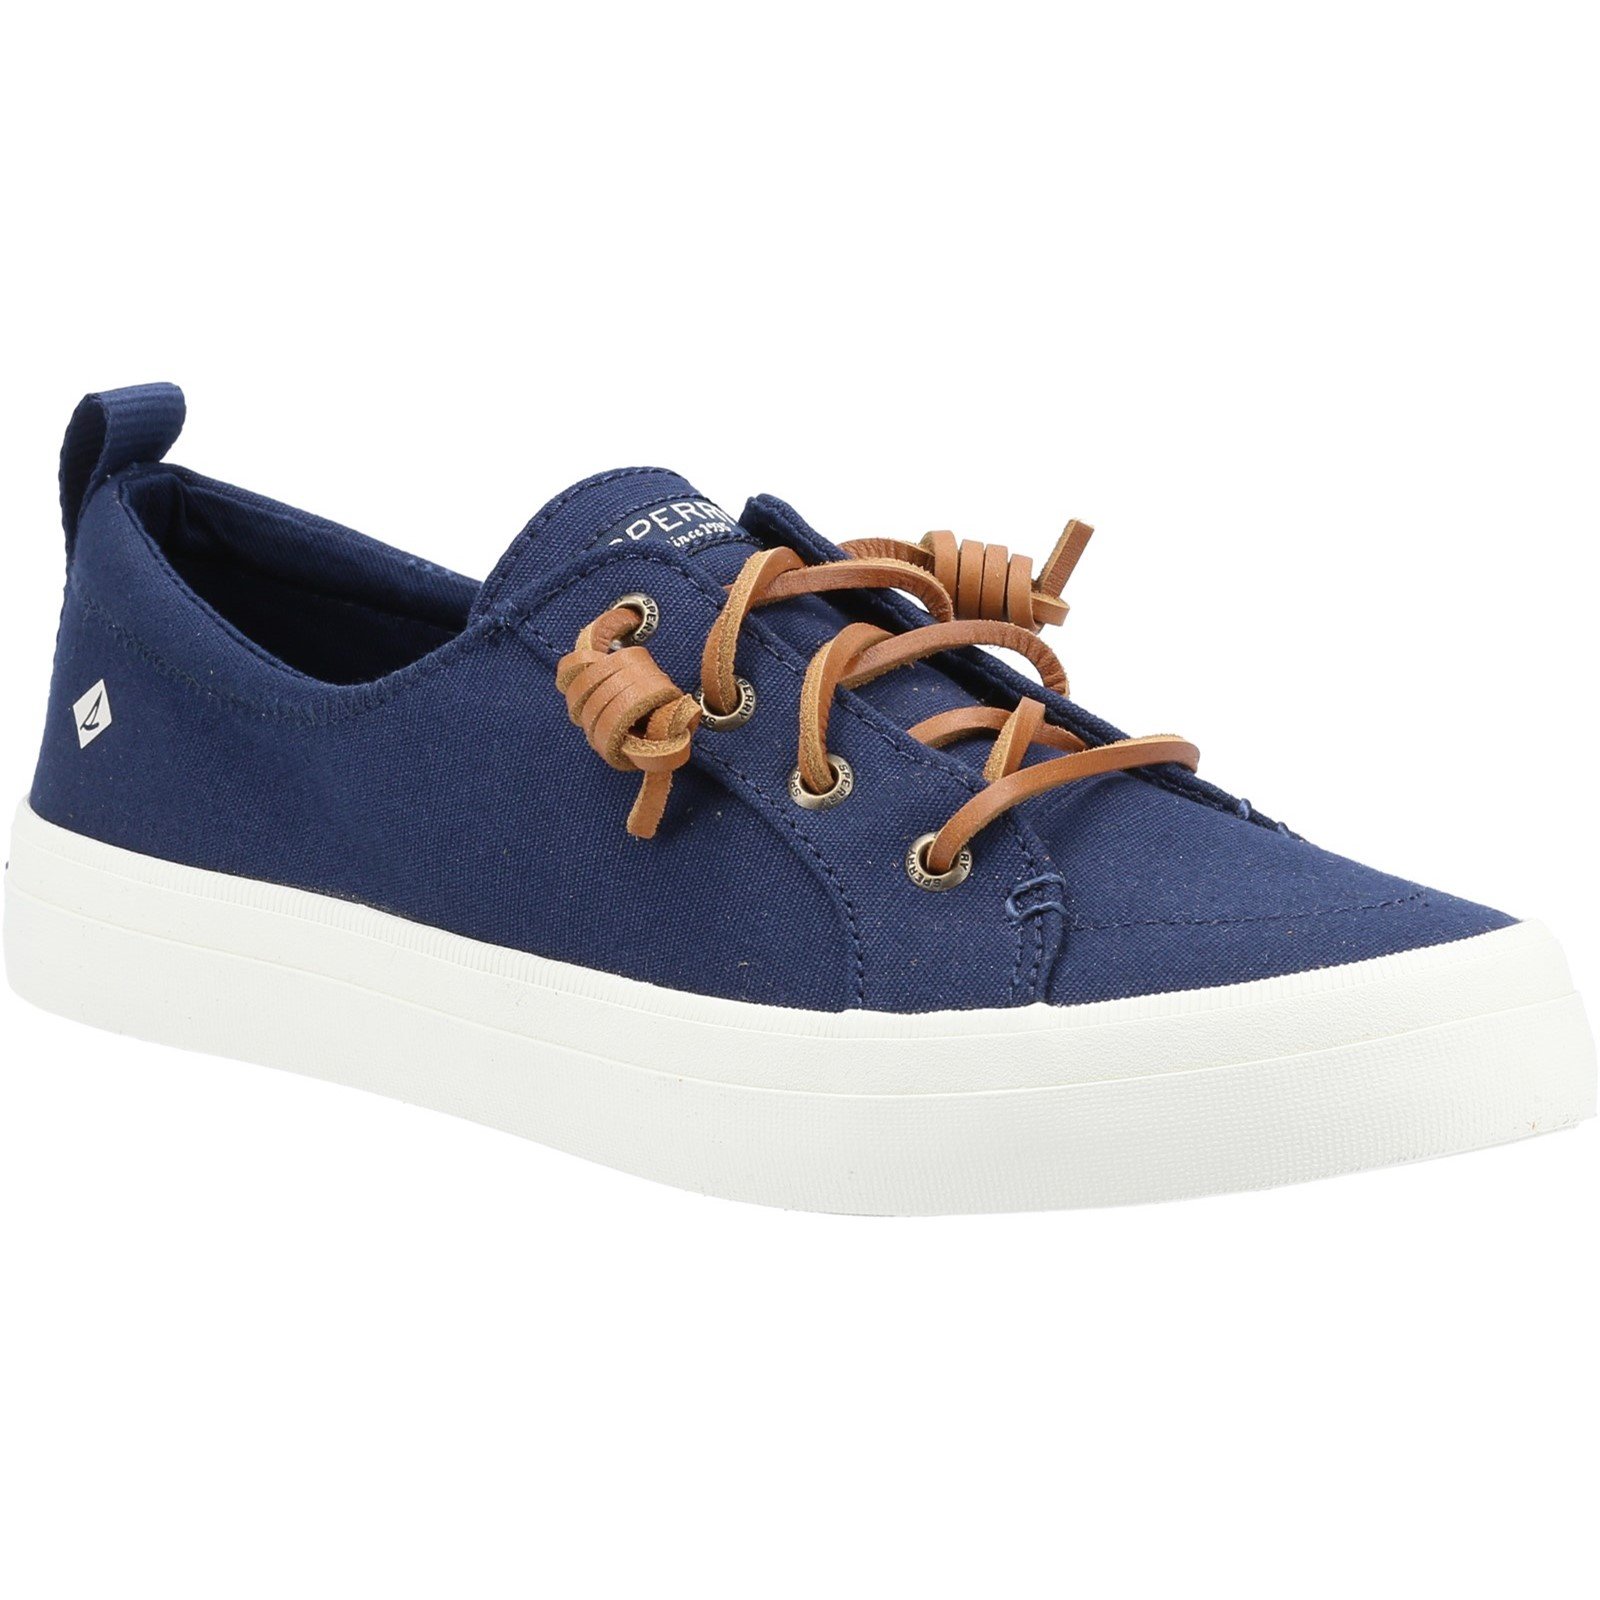 Sperry Women's Crest Vibe Canvas Lace Trainers Various Colours 32937 - Navy 7